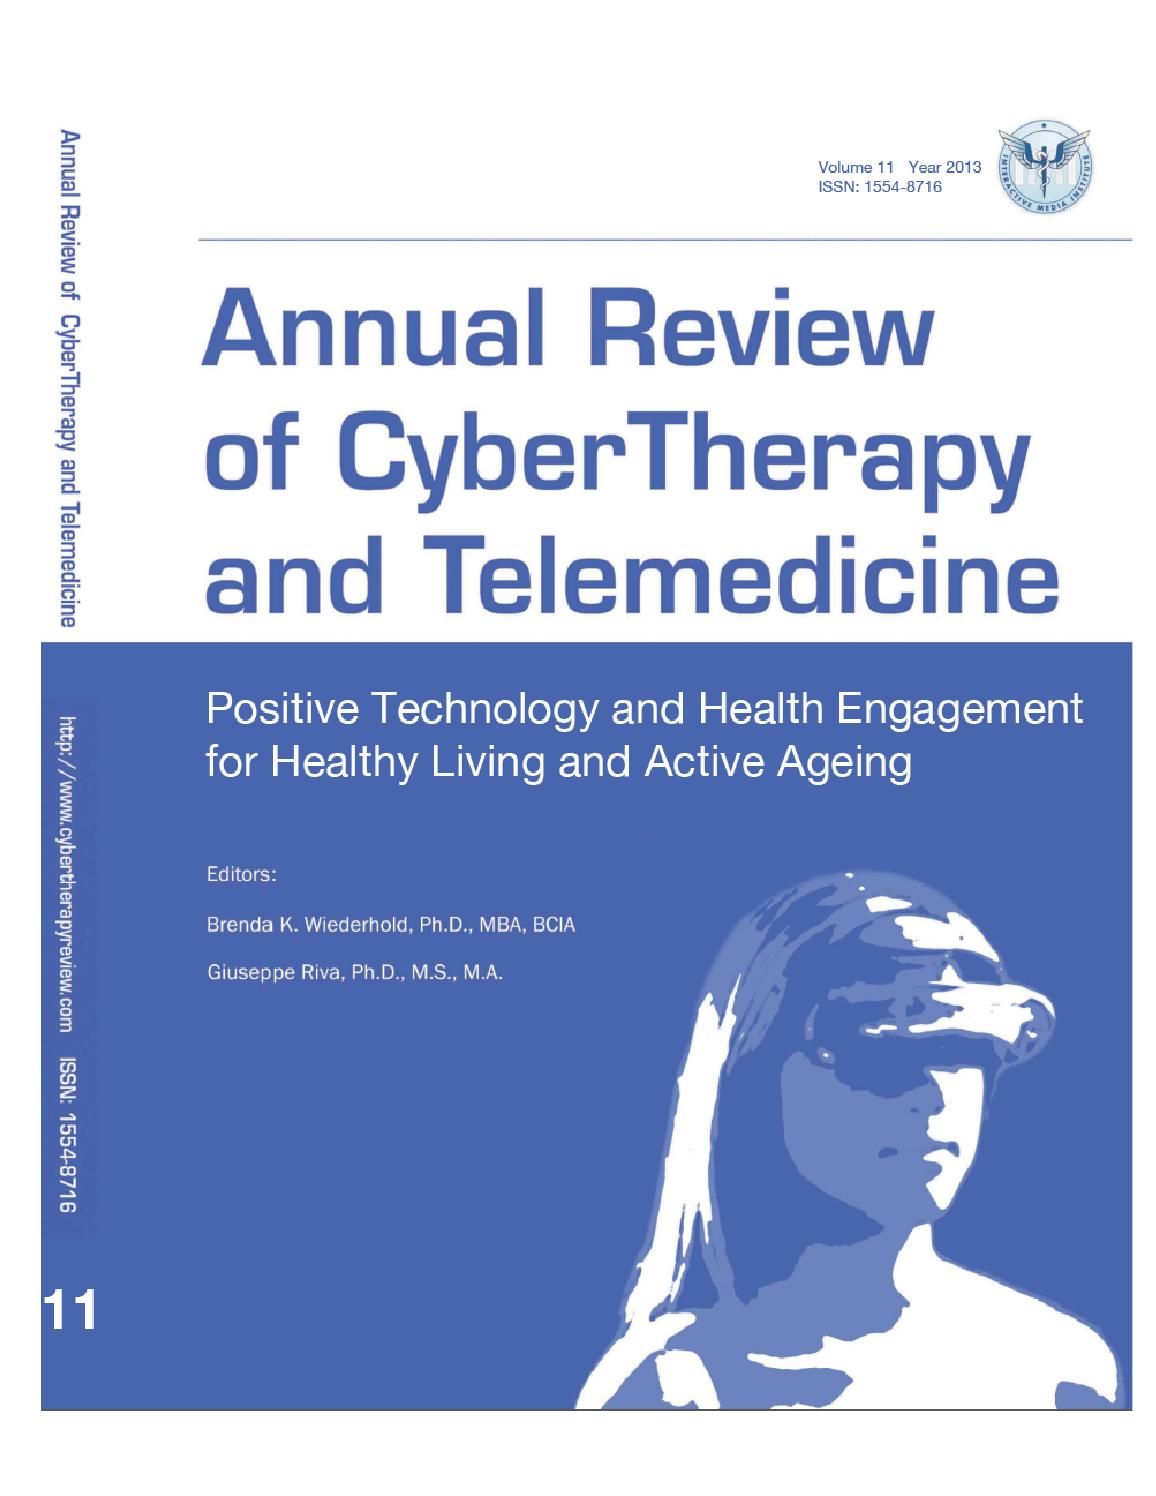 KostÃ¼mideen Frauen Inspirierend Annual Review Of Cybertherapy and Telemedicine Volume 11